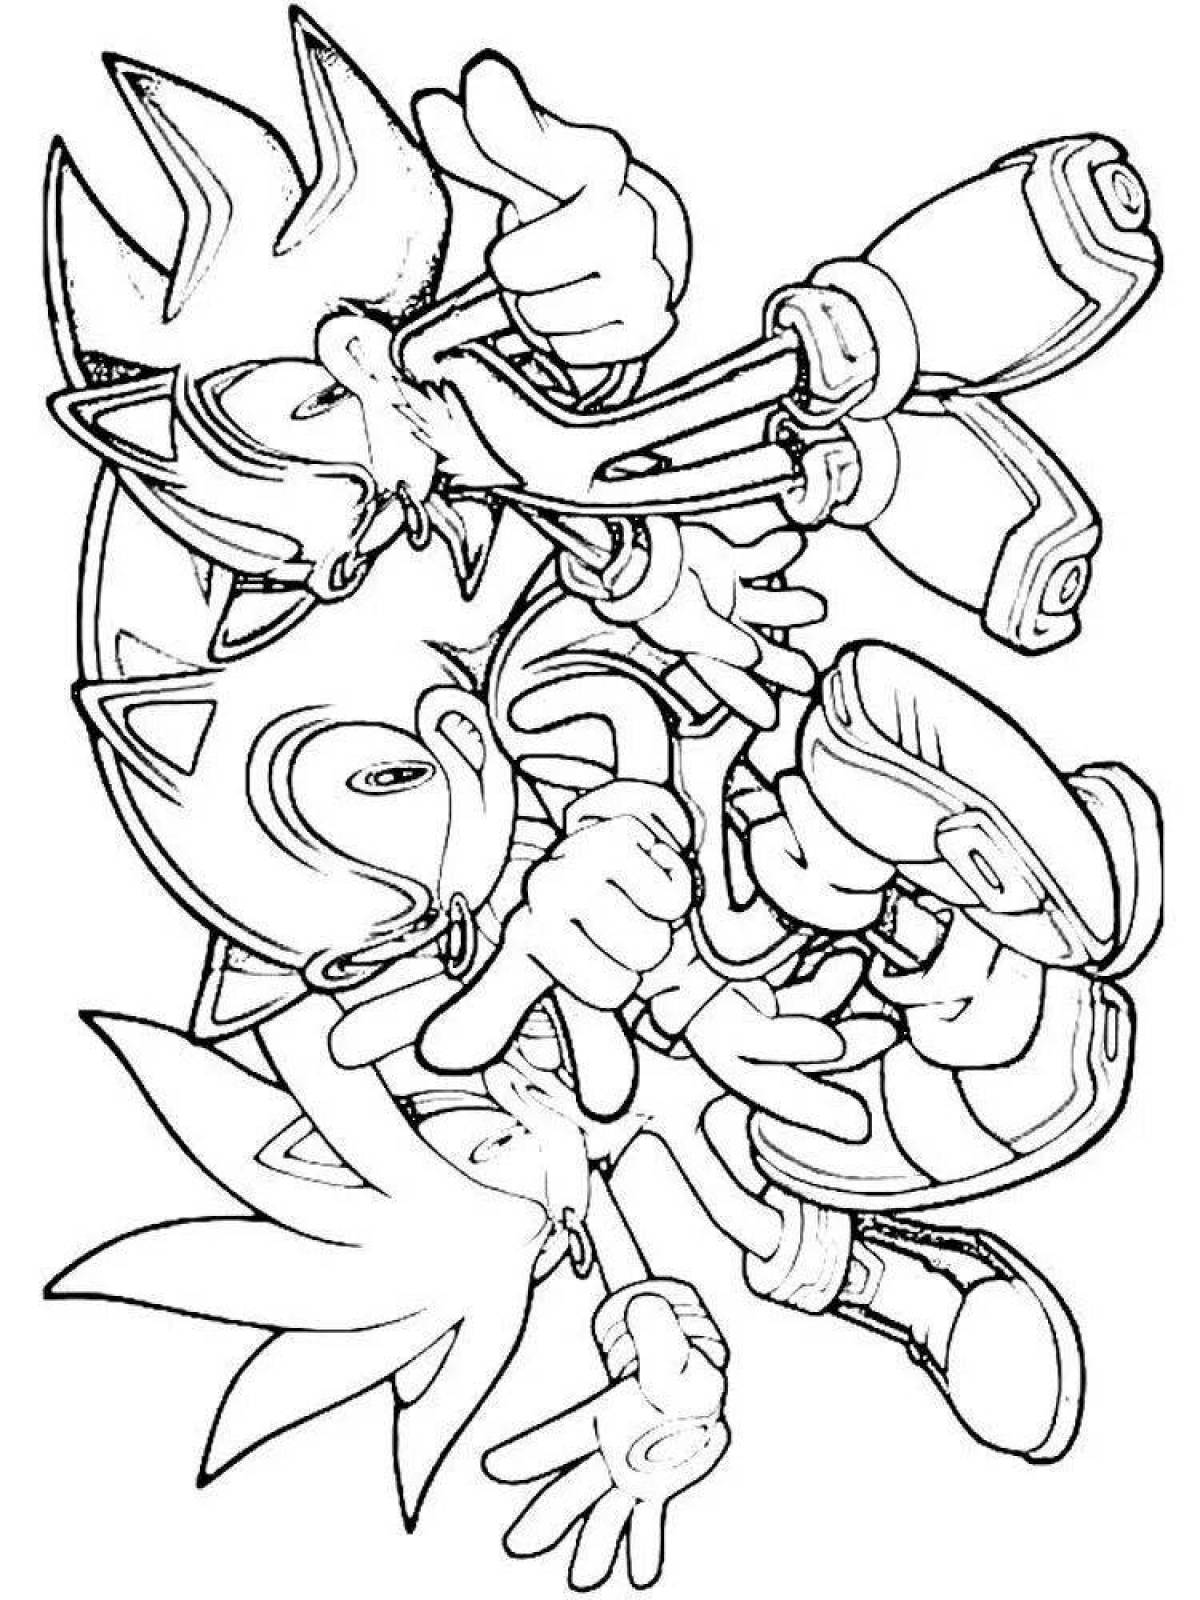 Animated shadow hedgehog coloring page